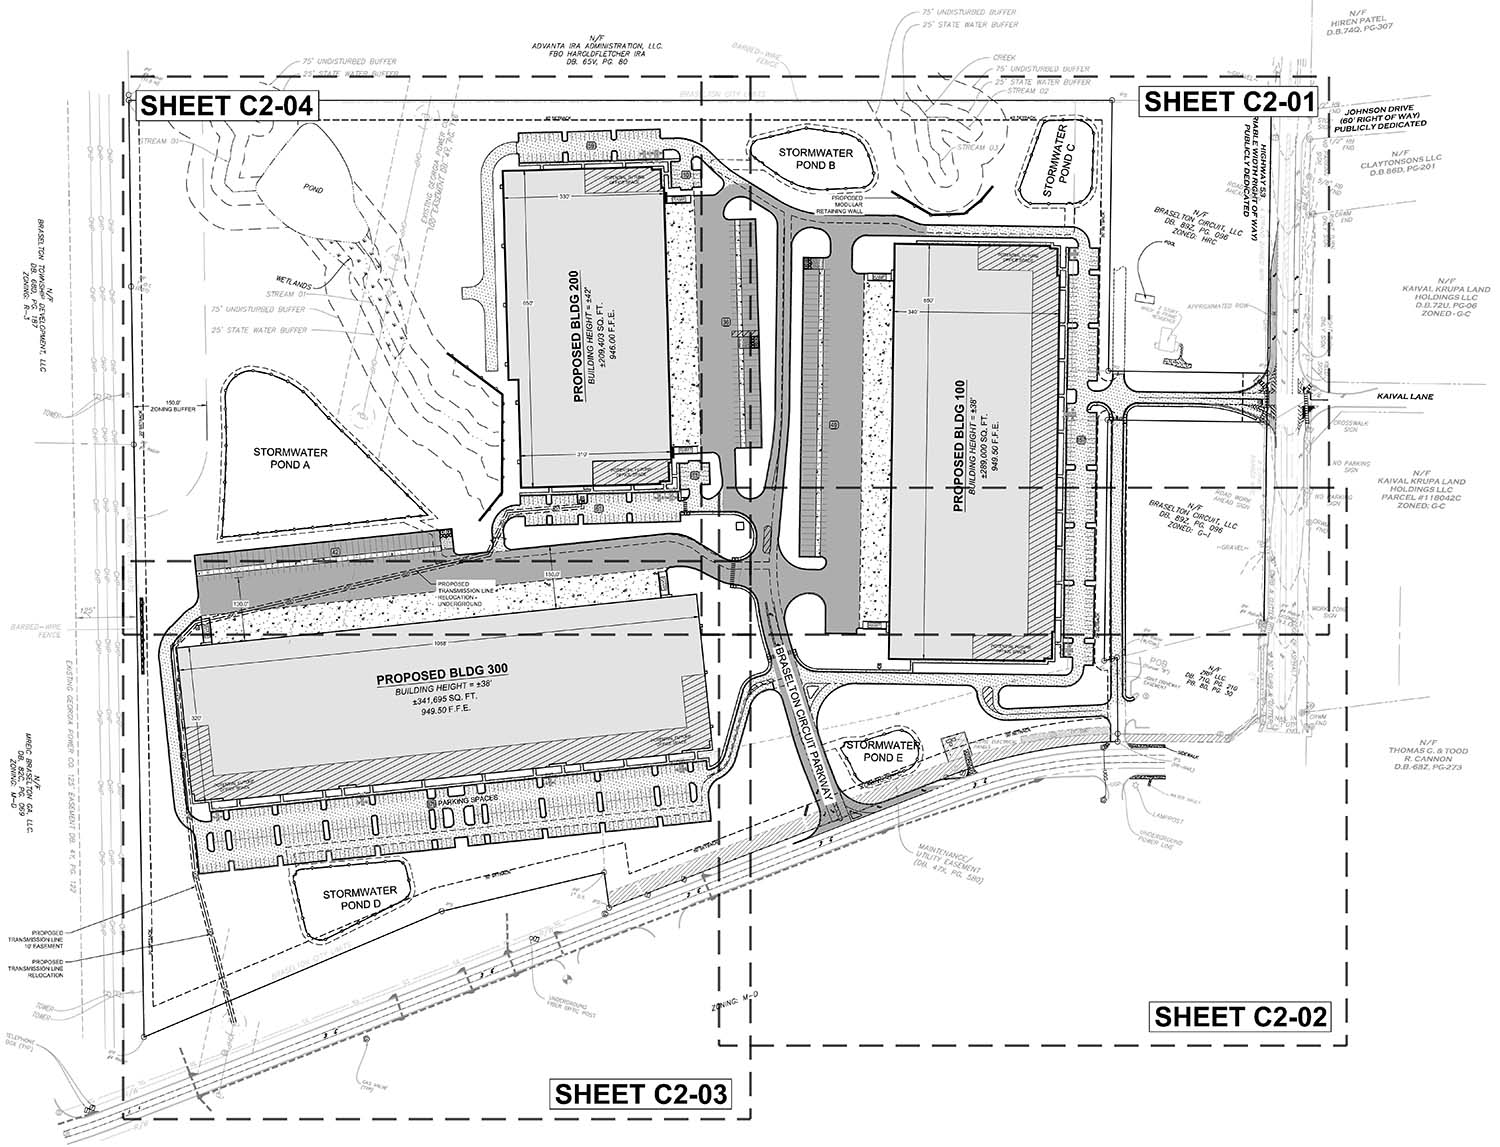 A technical drawing of the proposed Braselton Circuit Business Center buildings and layout.